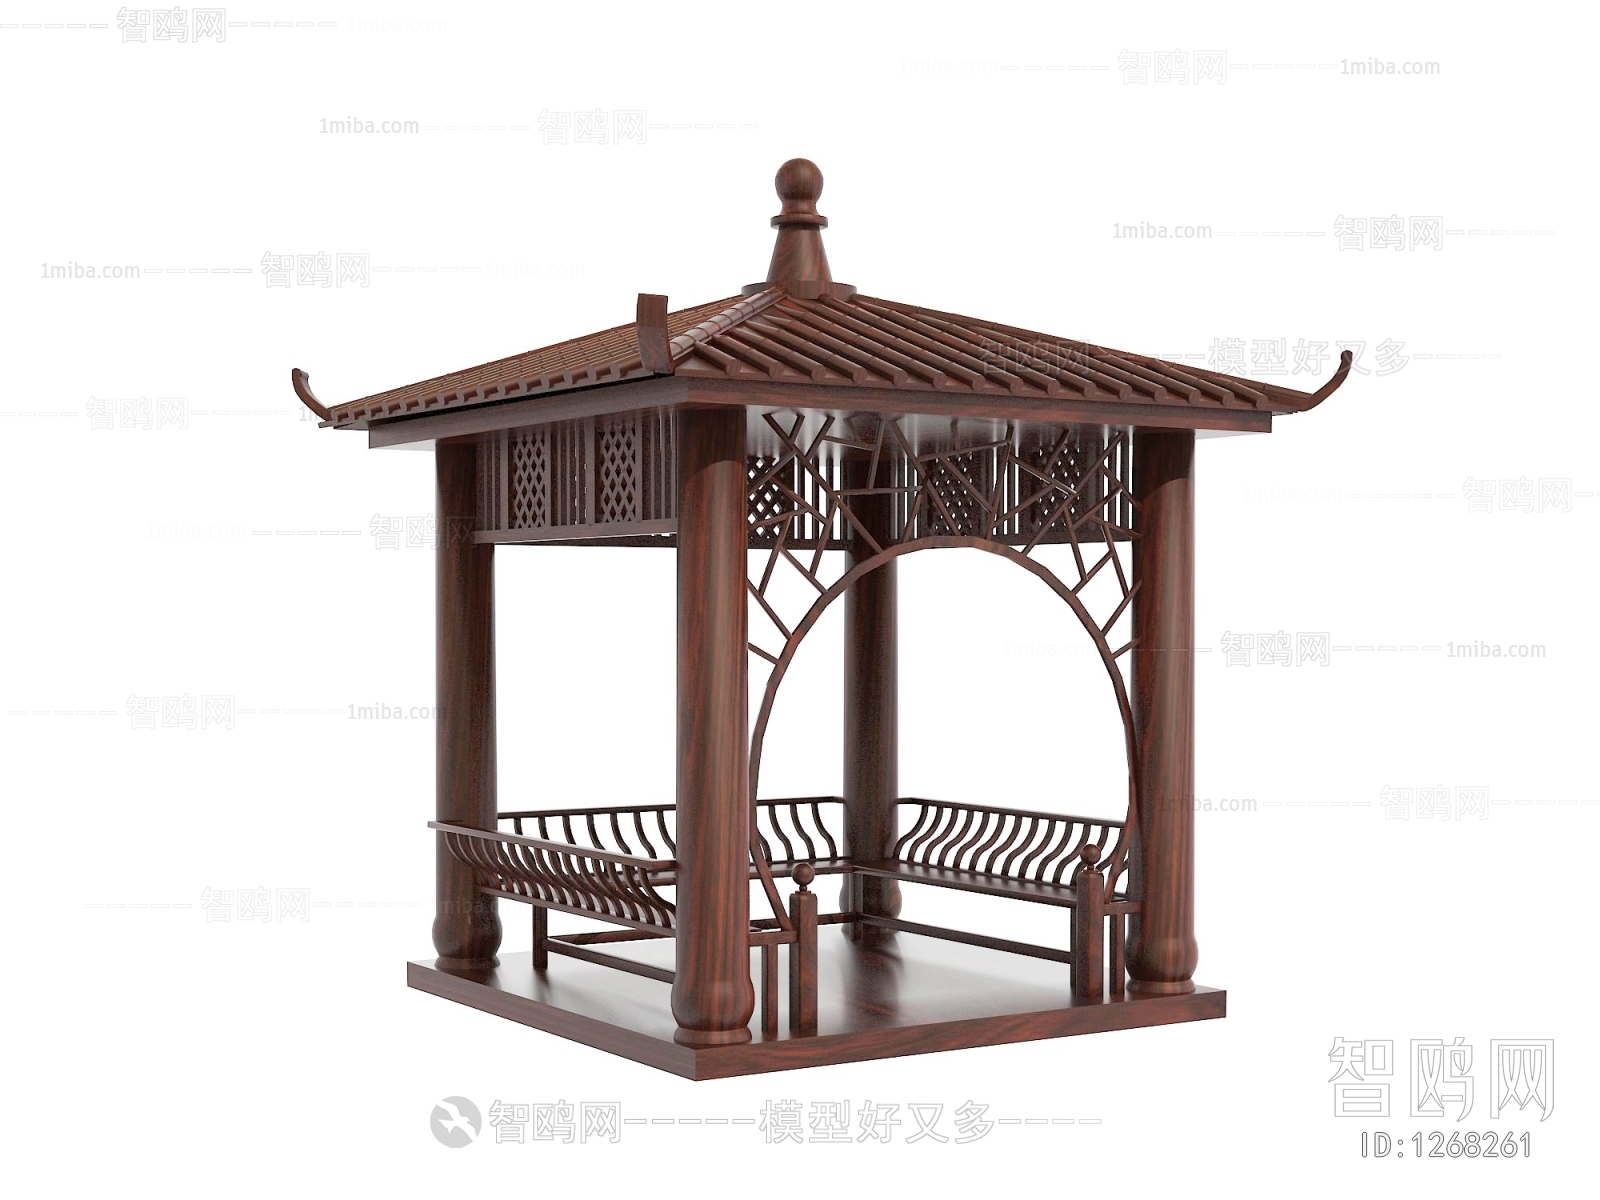 Modern Chinese Style Ancient Architectural Buildings